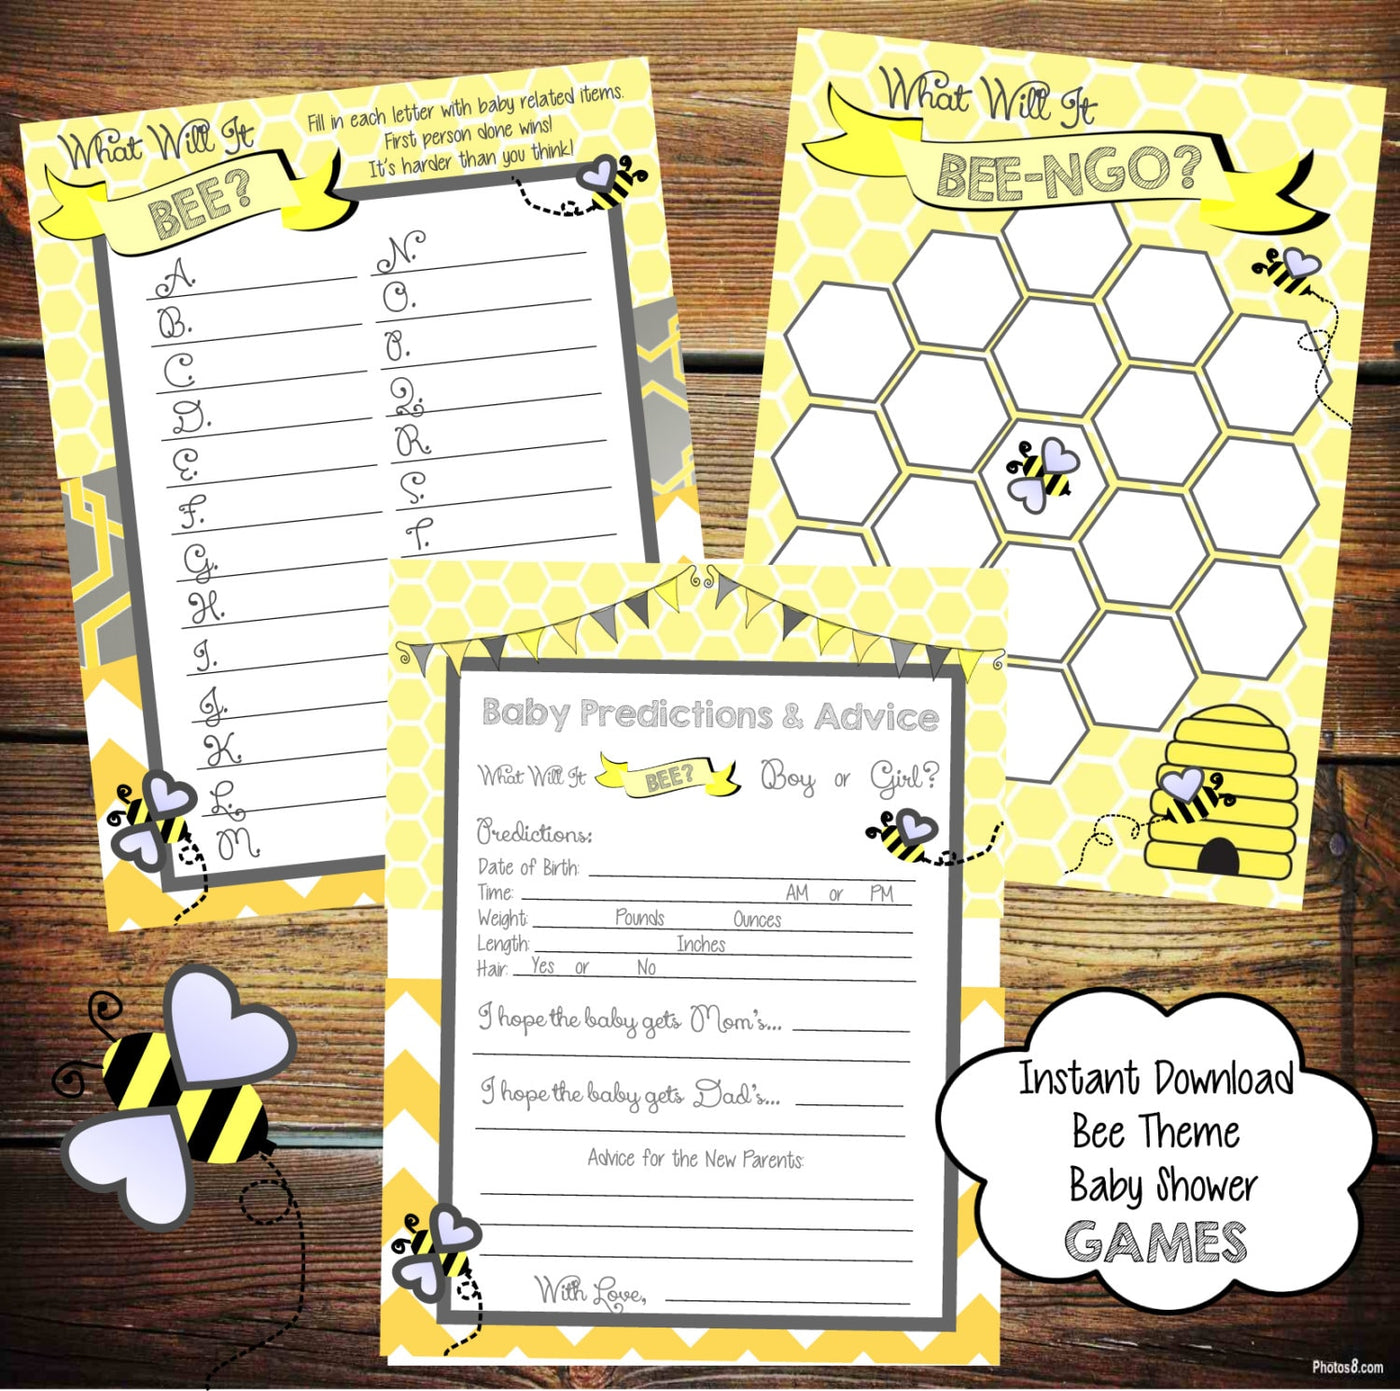 Baby Shower Games, What Will It BEE Baby Shower Games, Yellow and Grey Baby Shower Games, Baby Shower Bingo, Baby Prediction Guesses, Bees